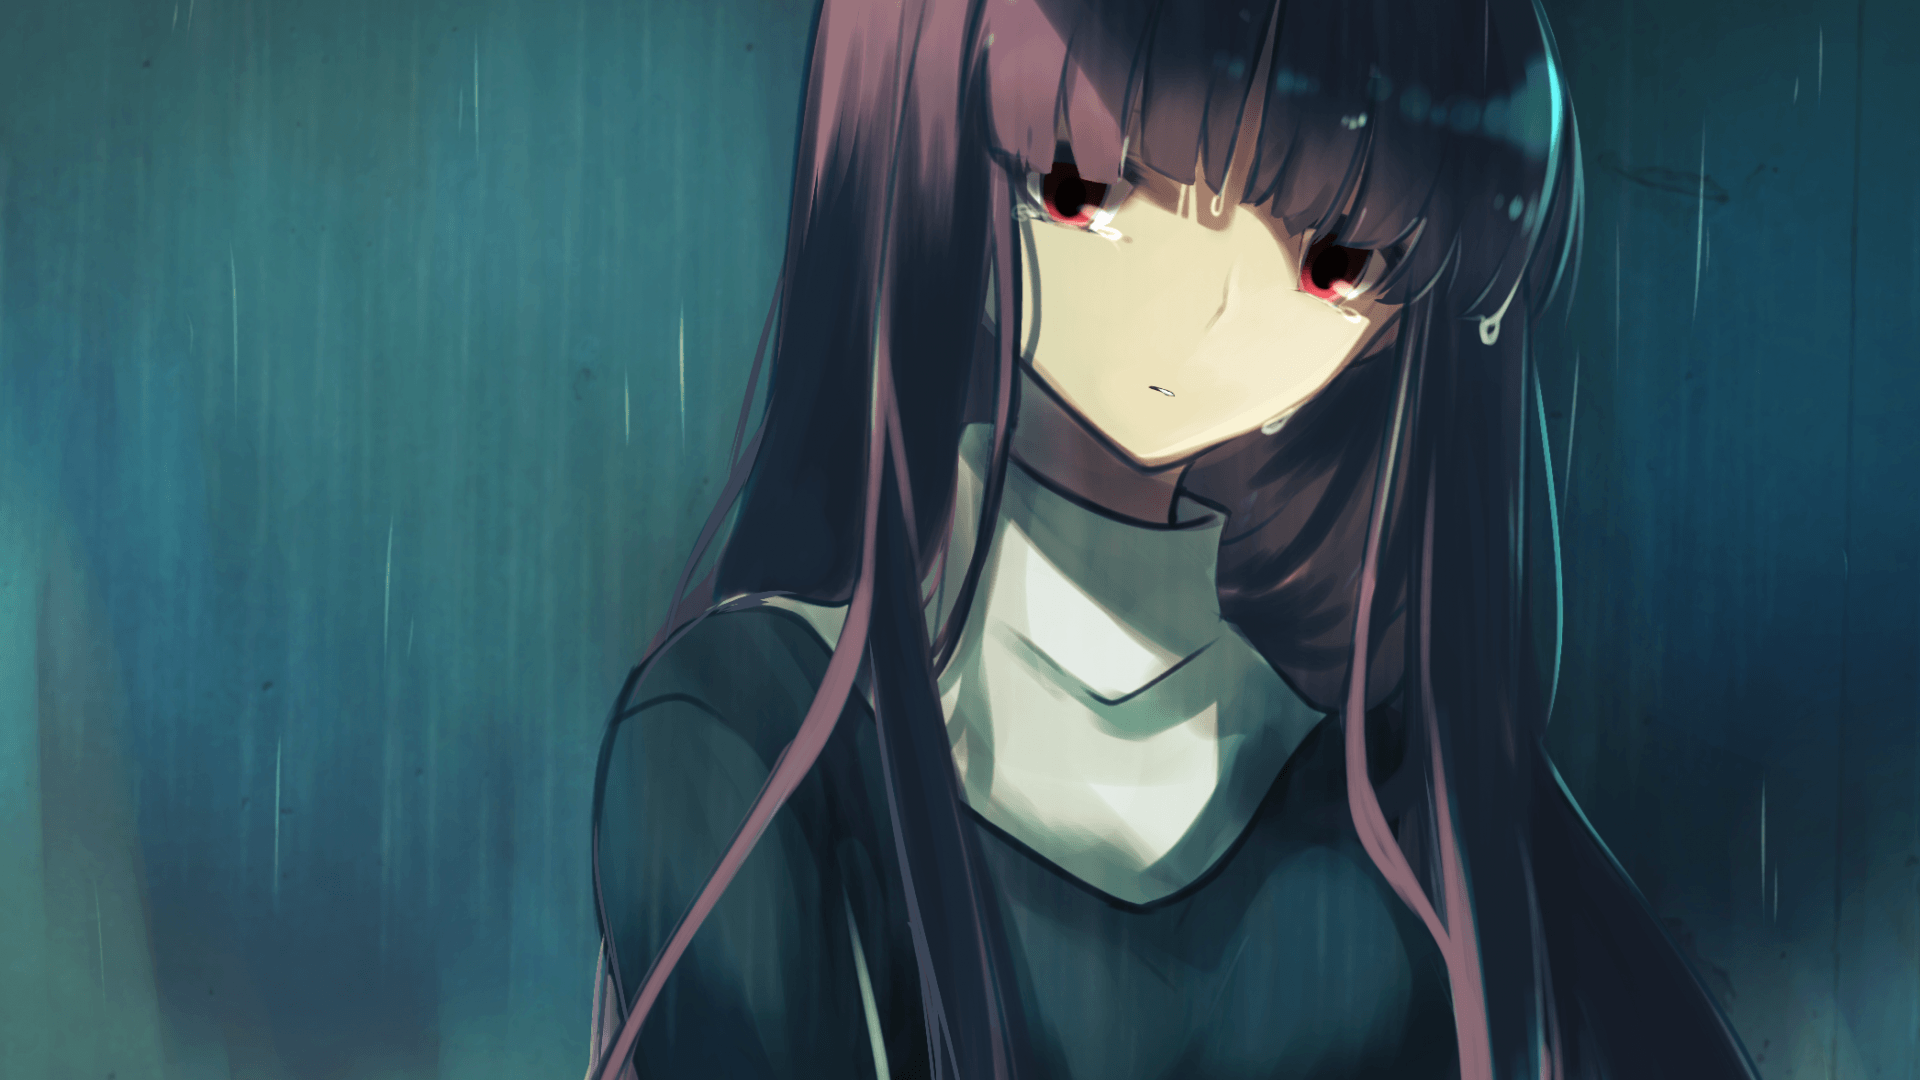 Anime Girl Smile While Crying Dowload Anime Wallpaper Hd | Images and ...